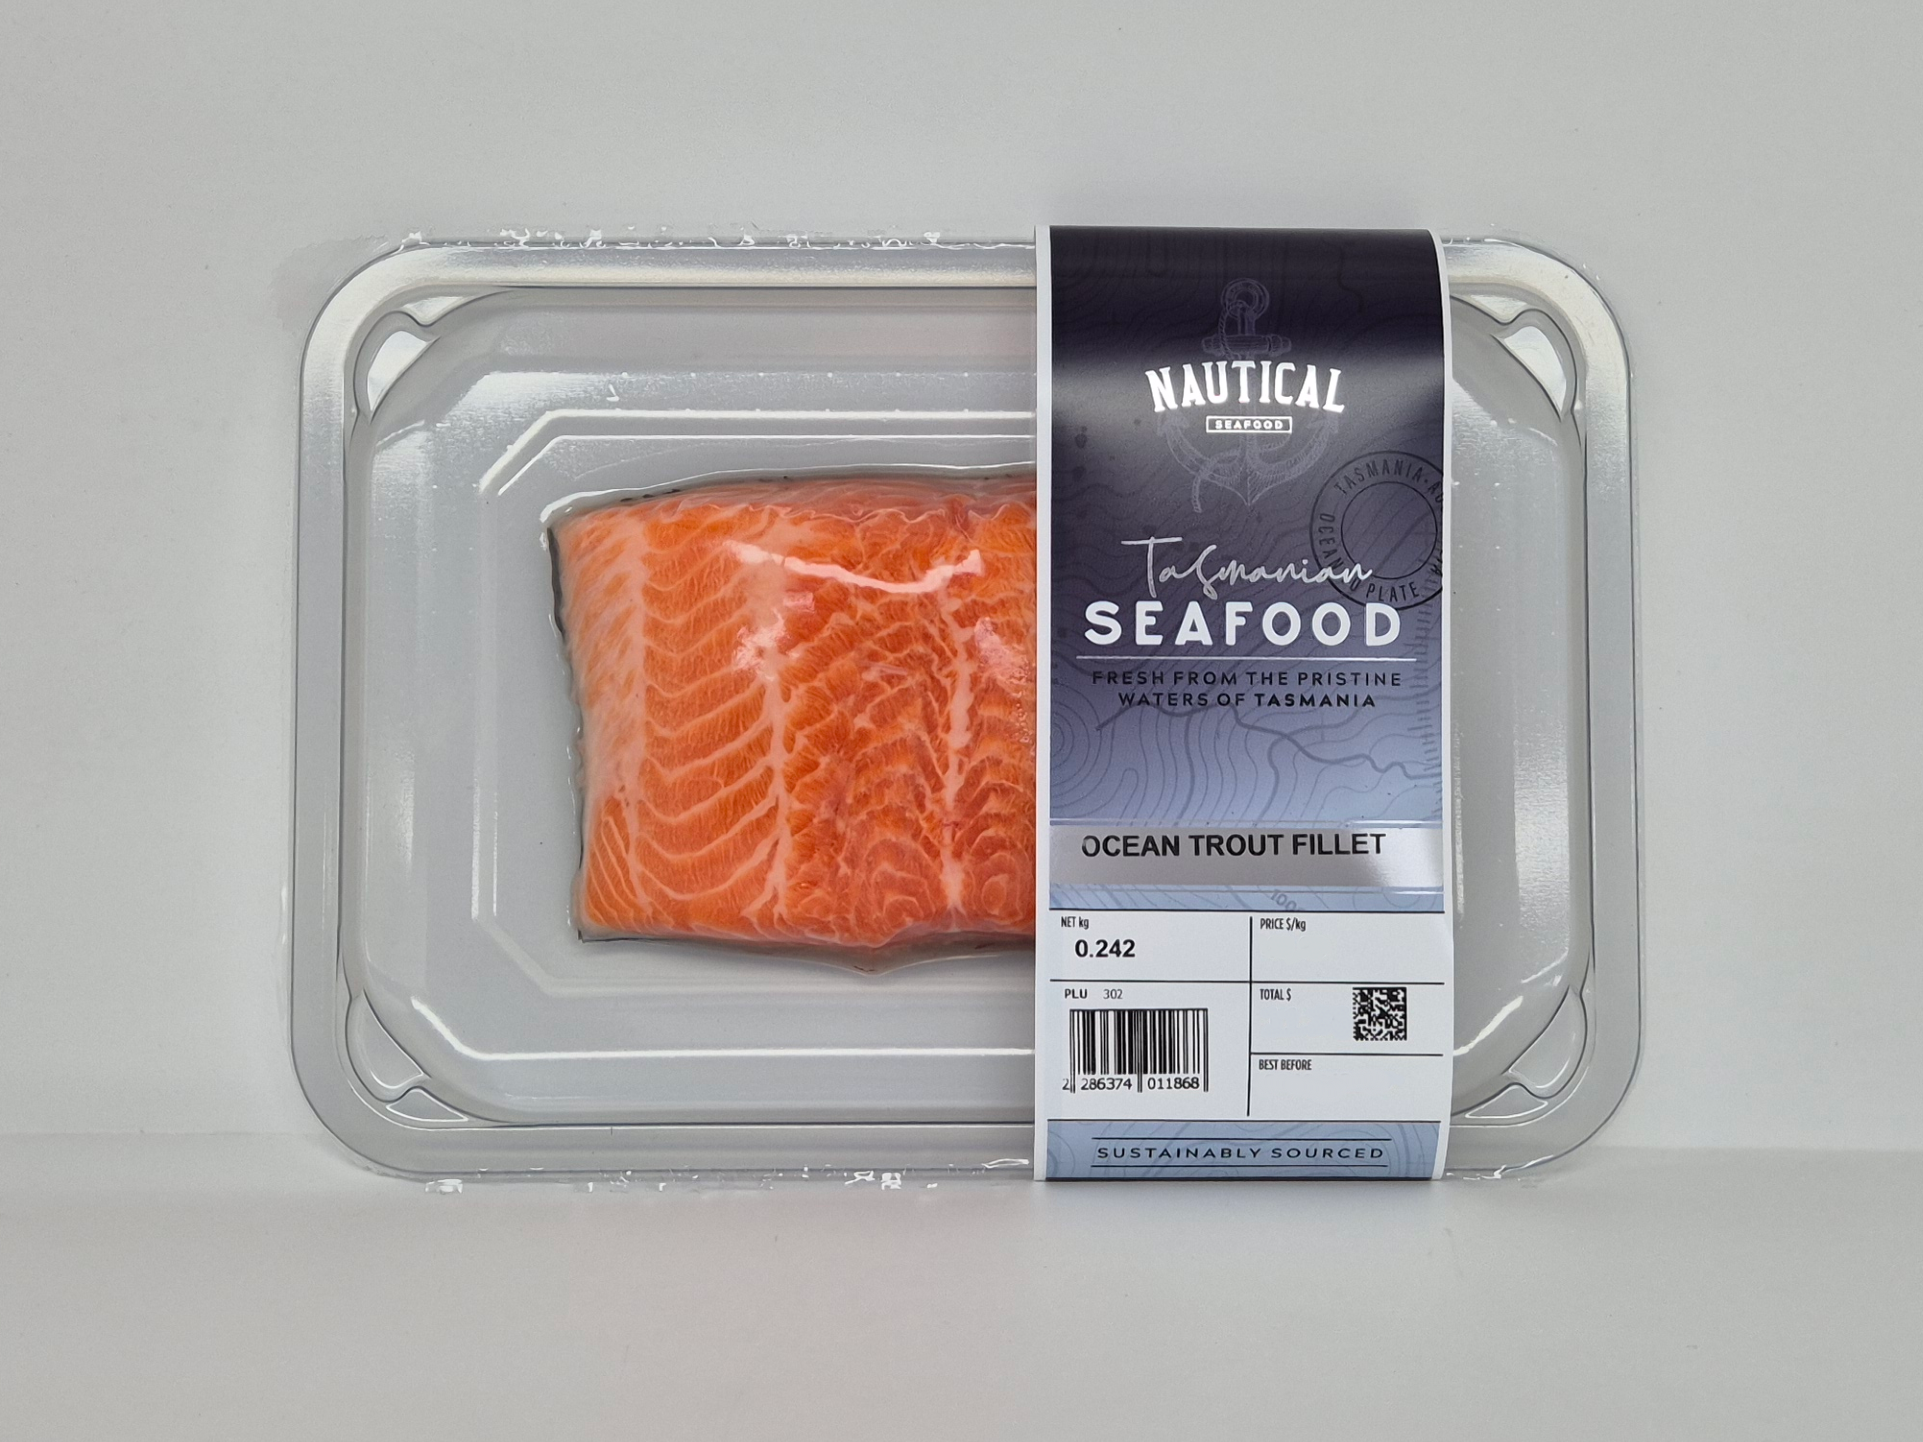 Nautical Seafood Ocean Trout Fillet